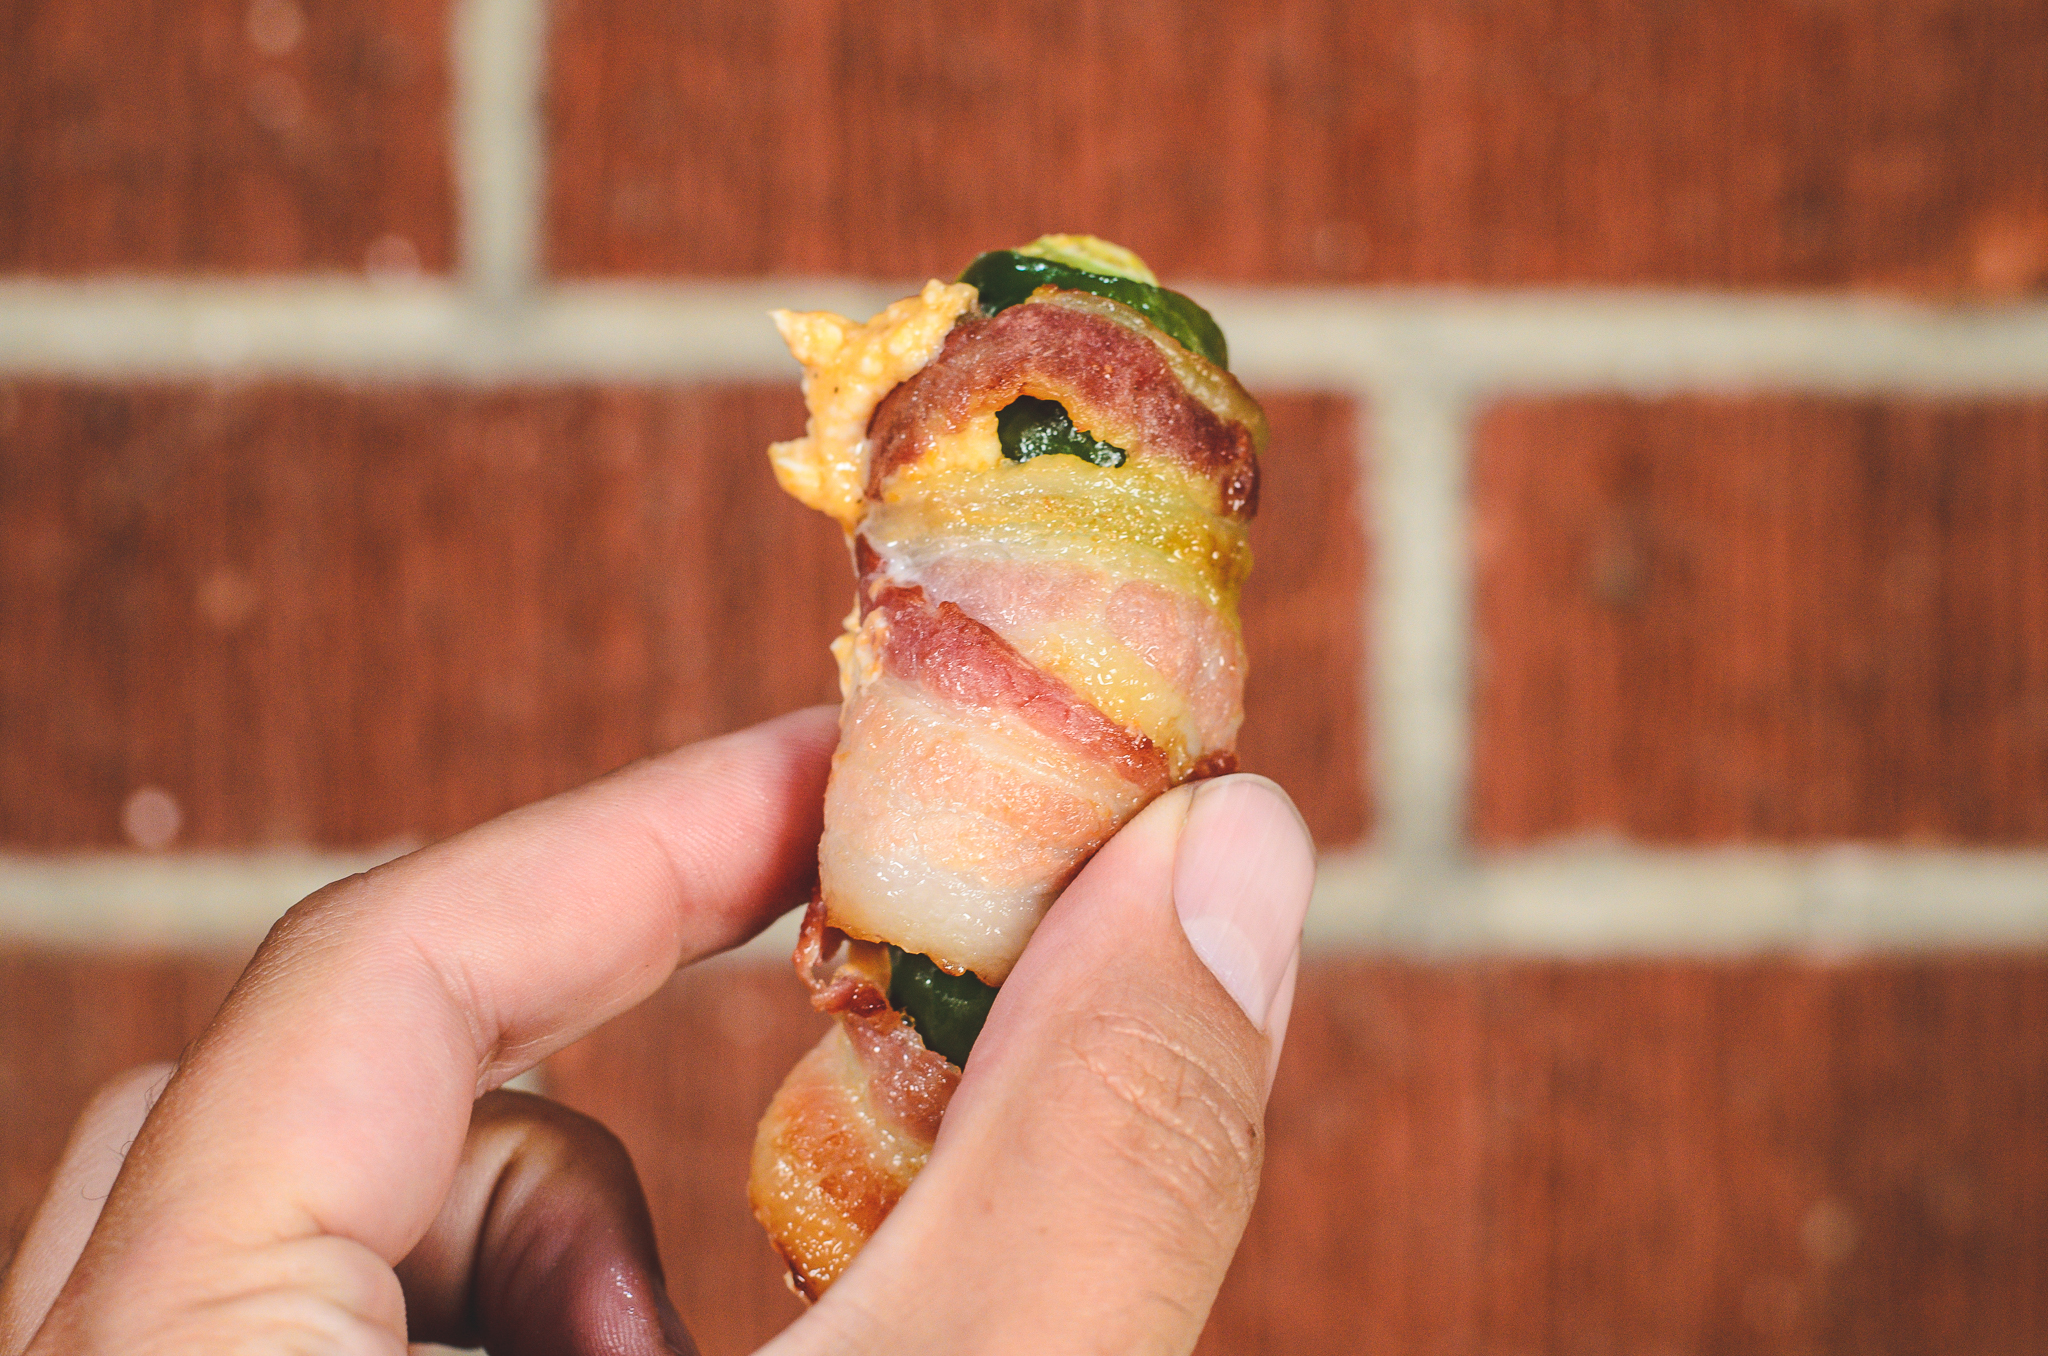 Jalapeno Poppers from Little Foot Foods in Windsor, Ontario.